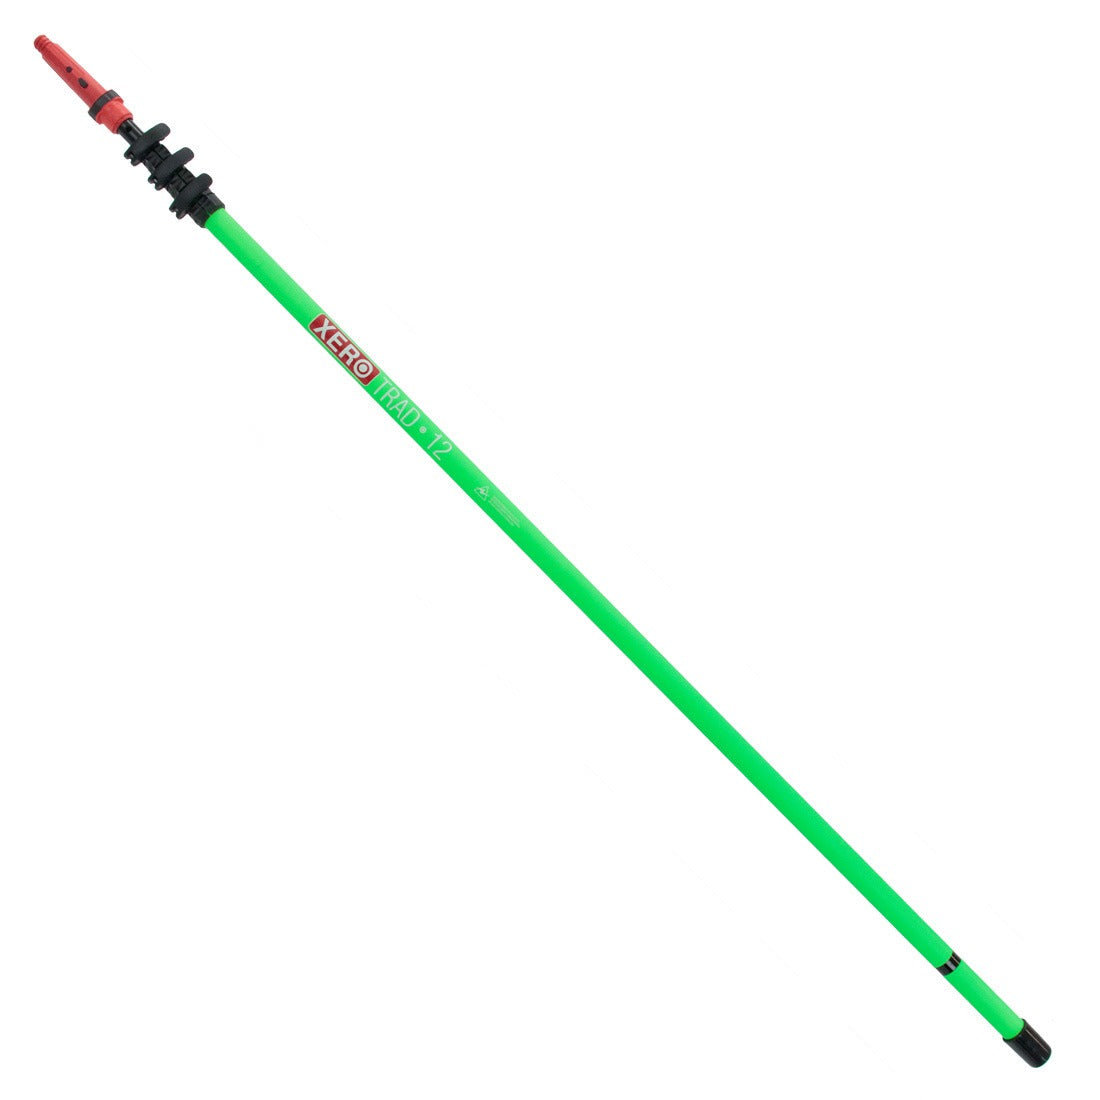 XERO Carbon Fiber Trad Pole 2.0 Unger Tip Green 12 Foot Front View